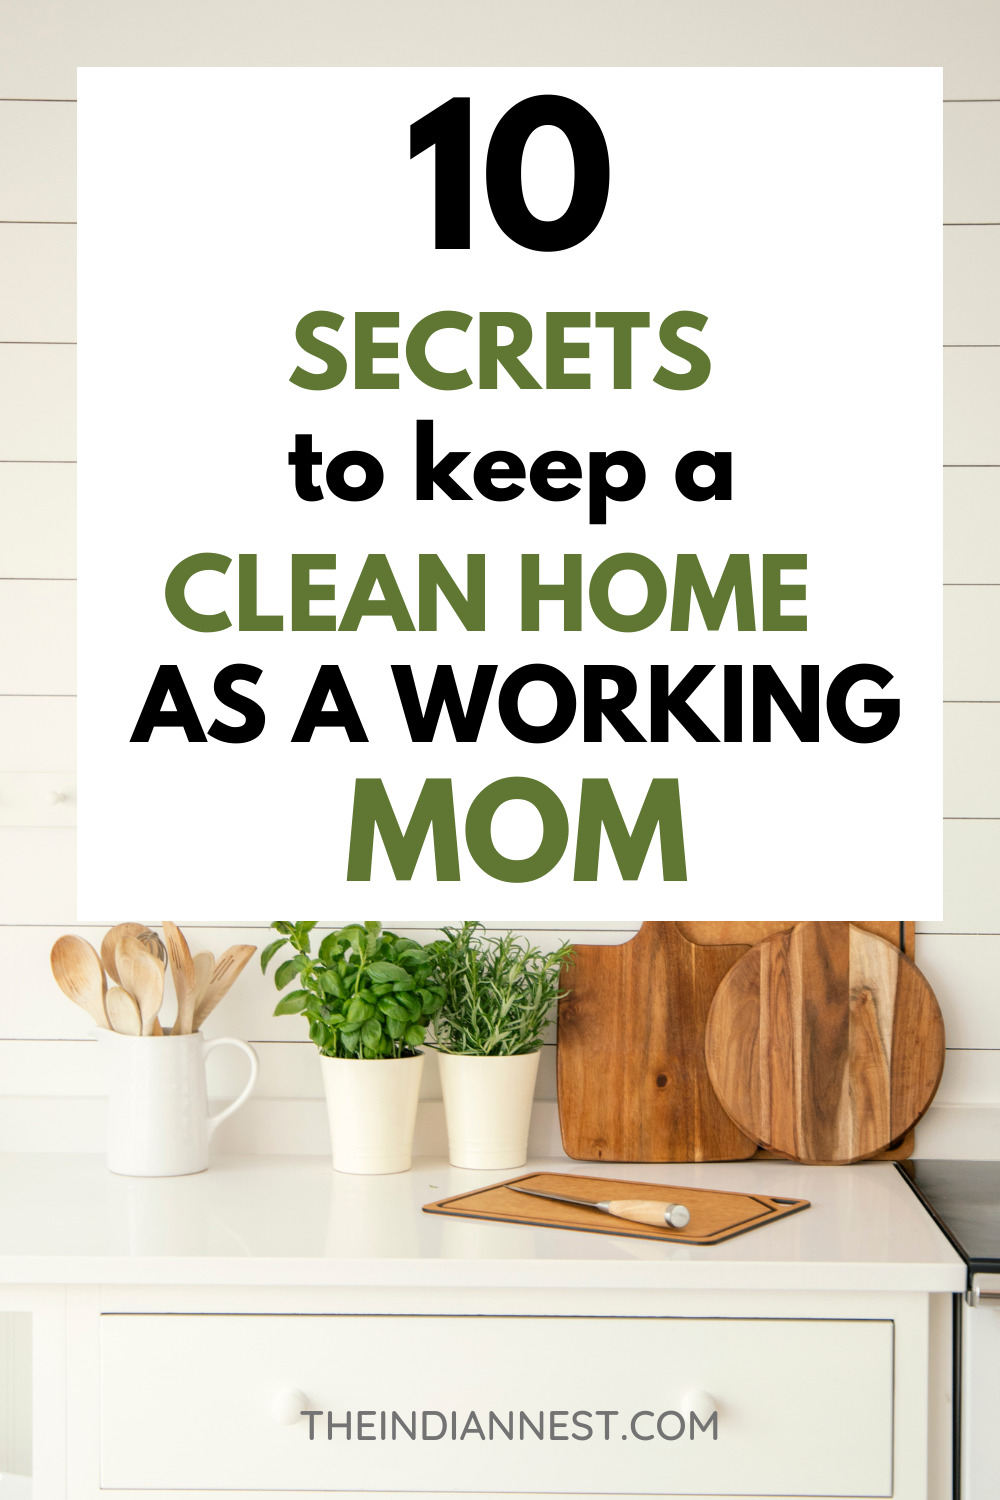 CLEANING SECRETS of a Working Mom! 